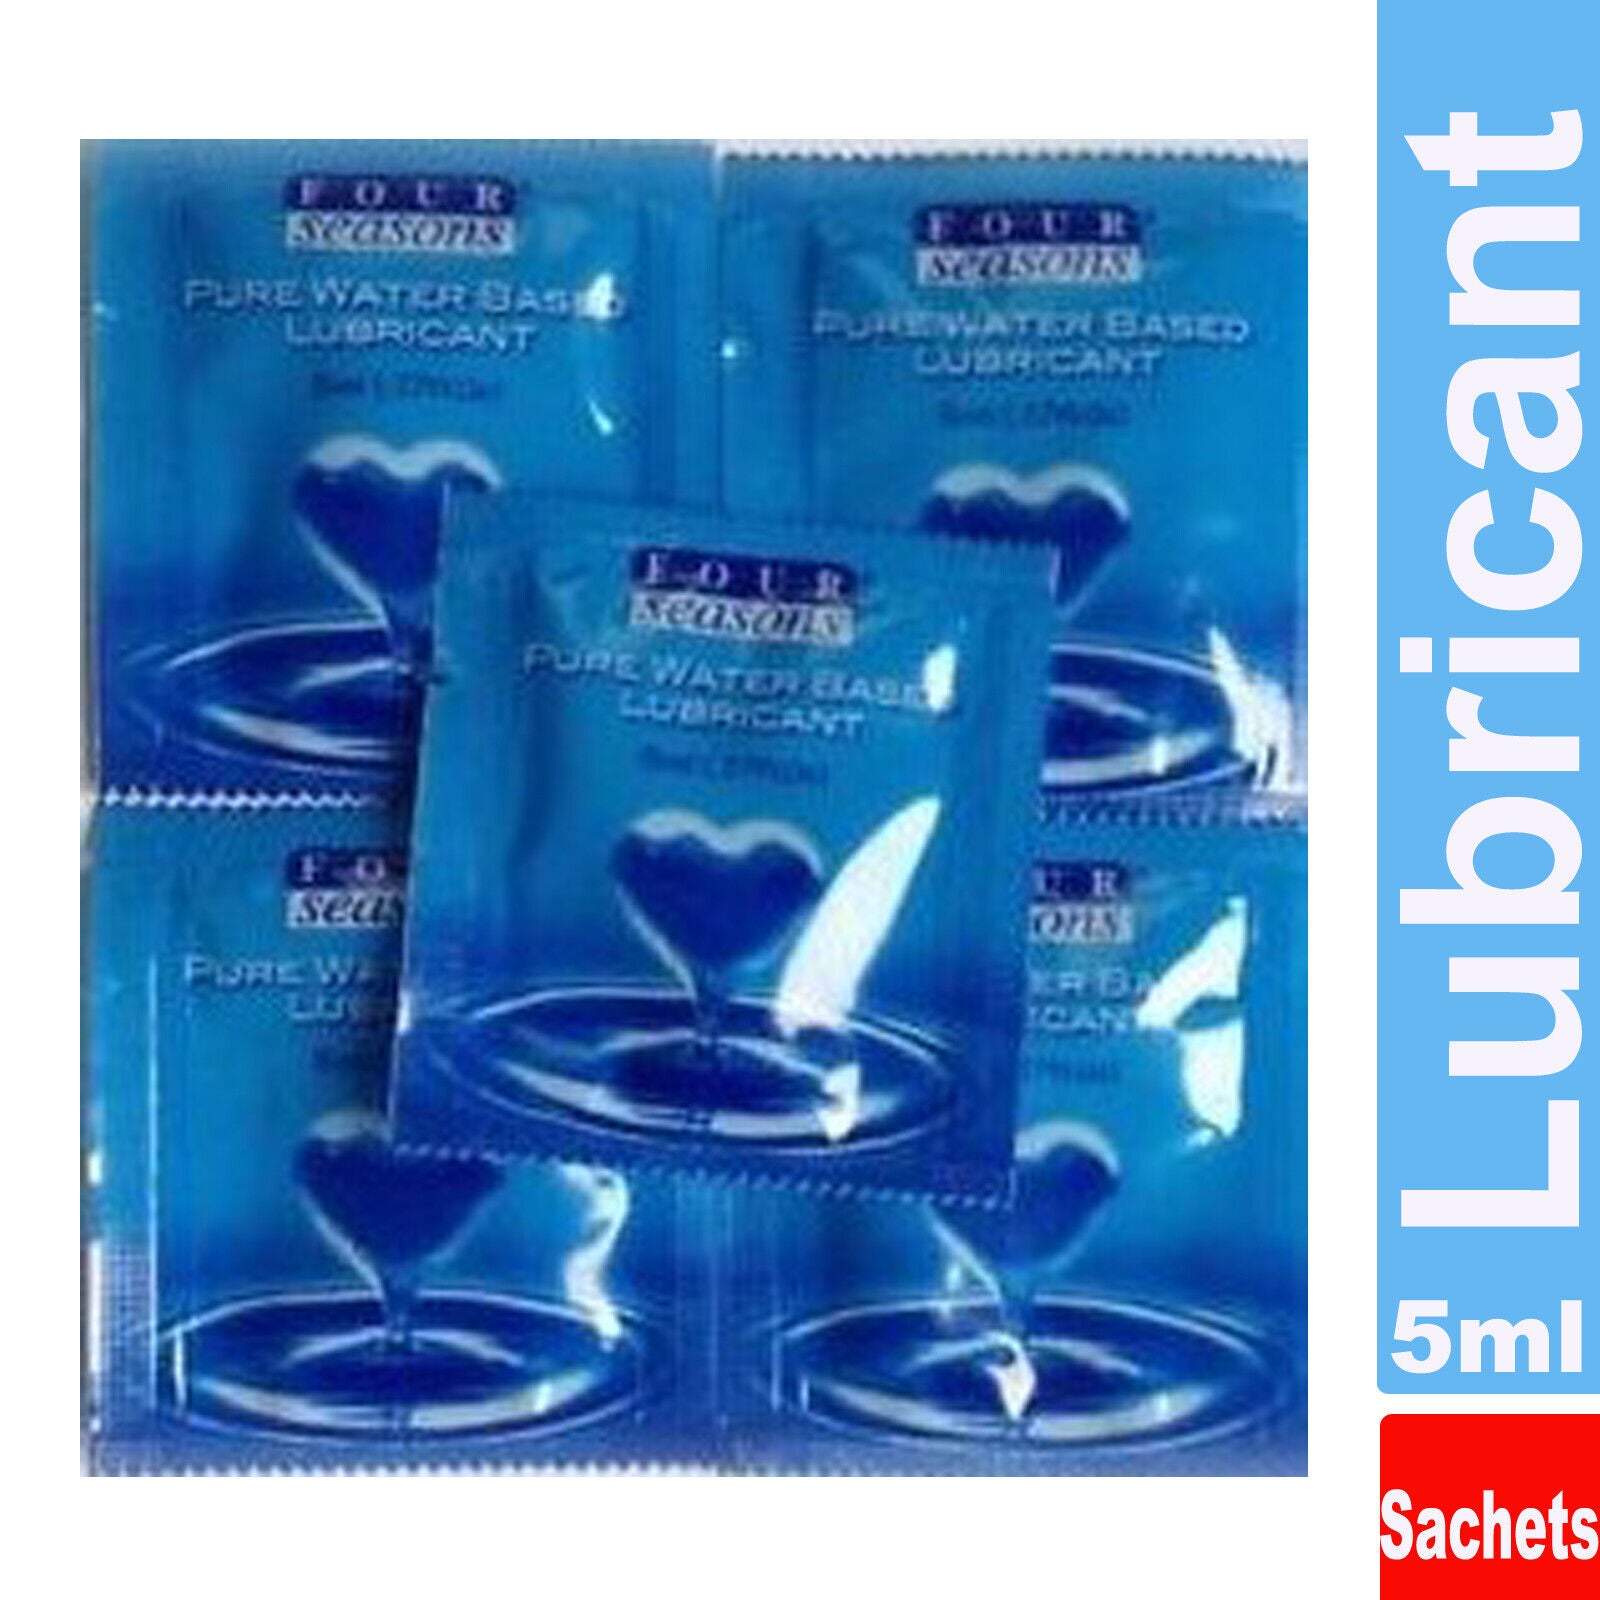 Four Seasons Water Based Lubricant Sex Lube Toy Safe Natural Feel Lubricant 6 x 5ml Sachets